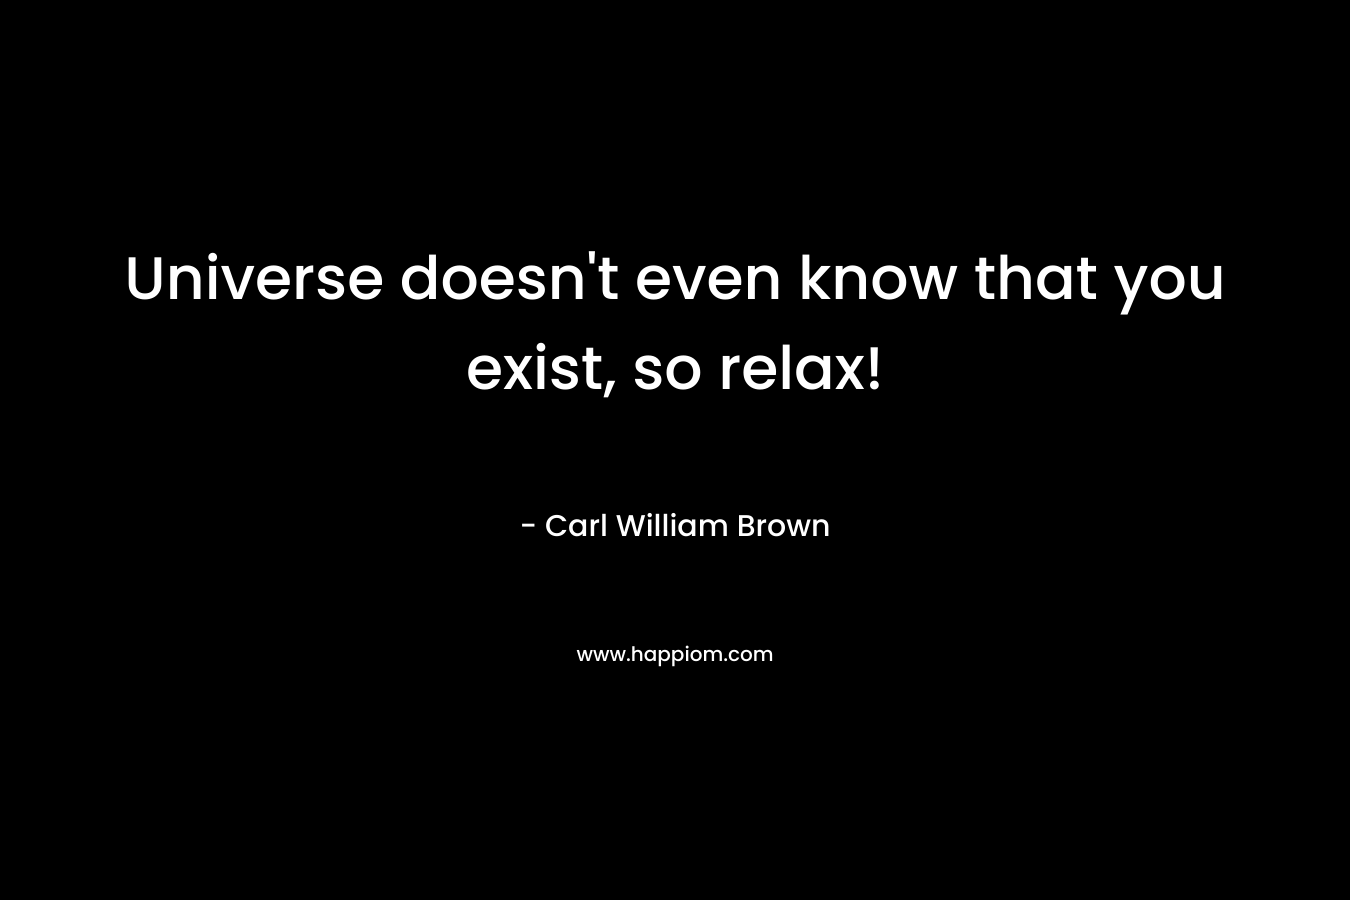 Universe doesn't even know that you exist, so relax!